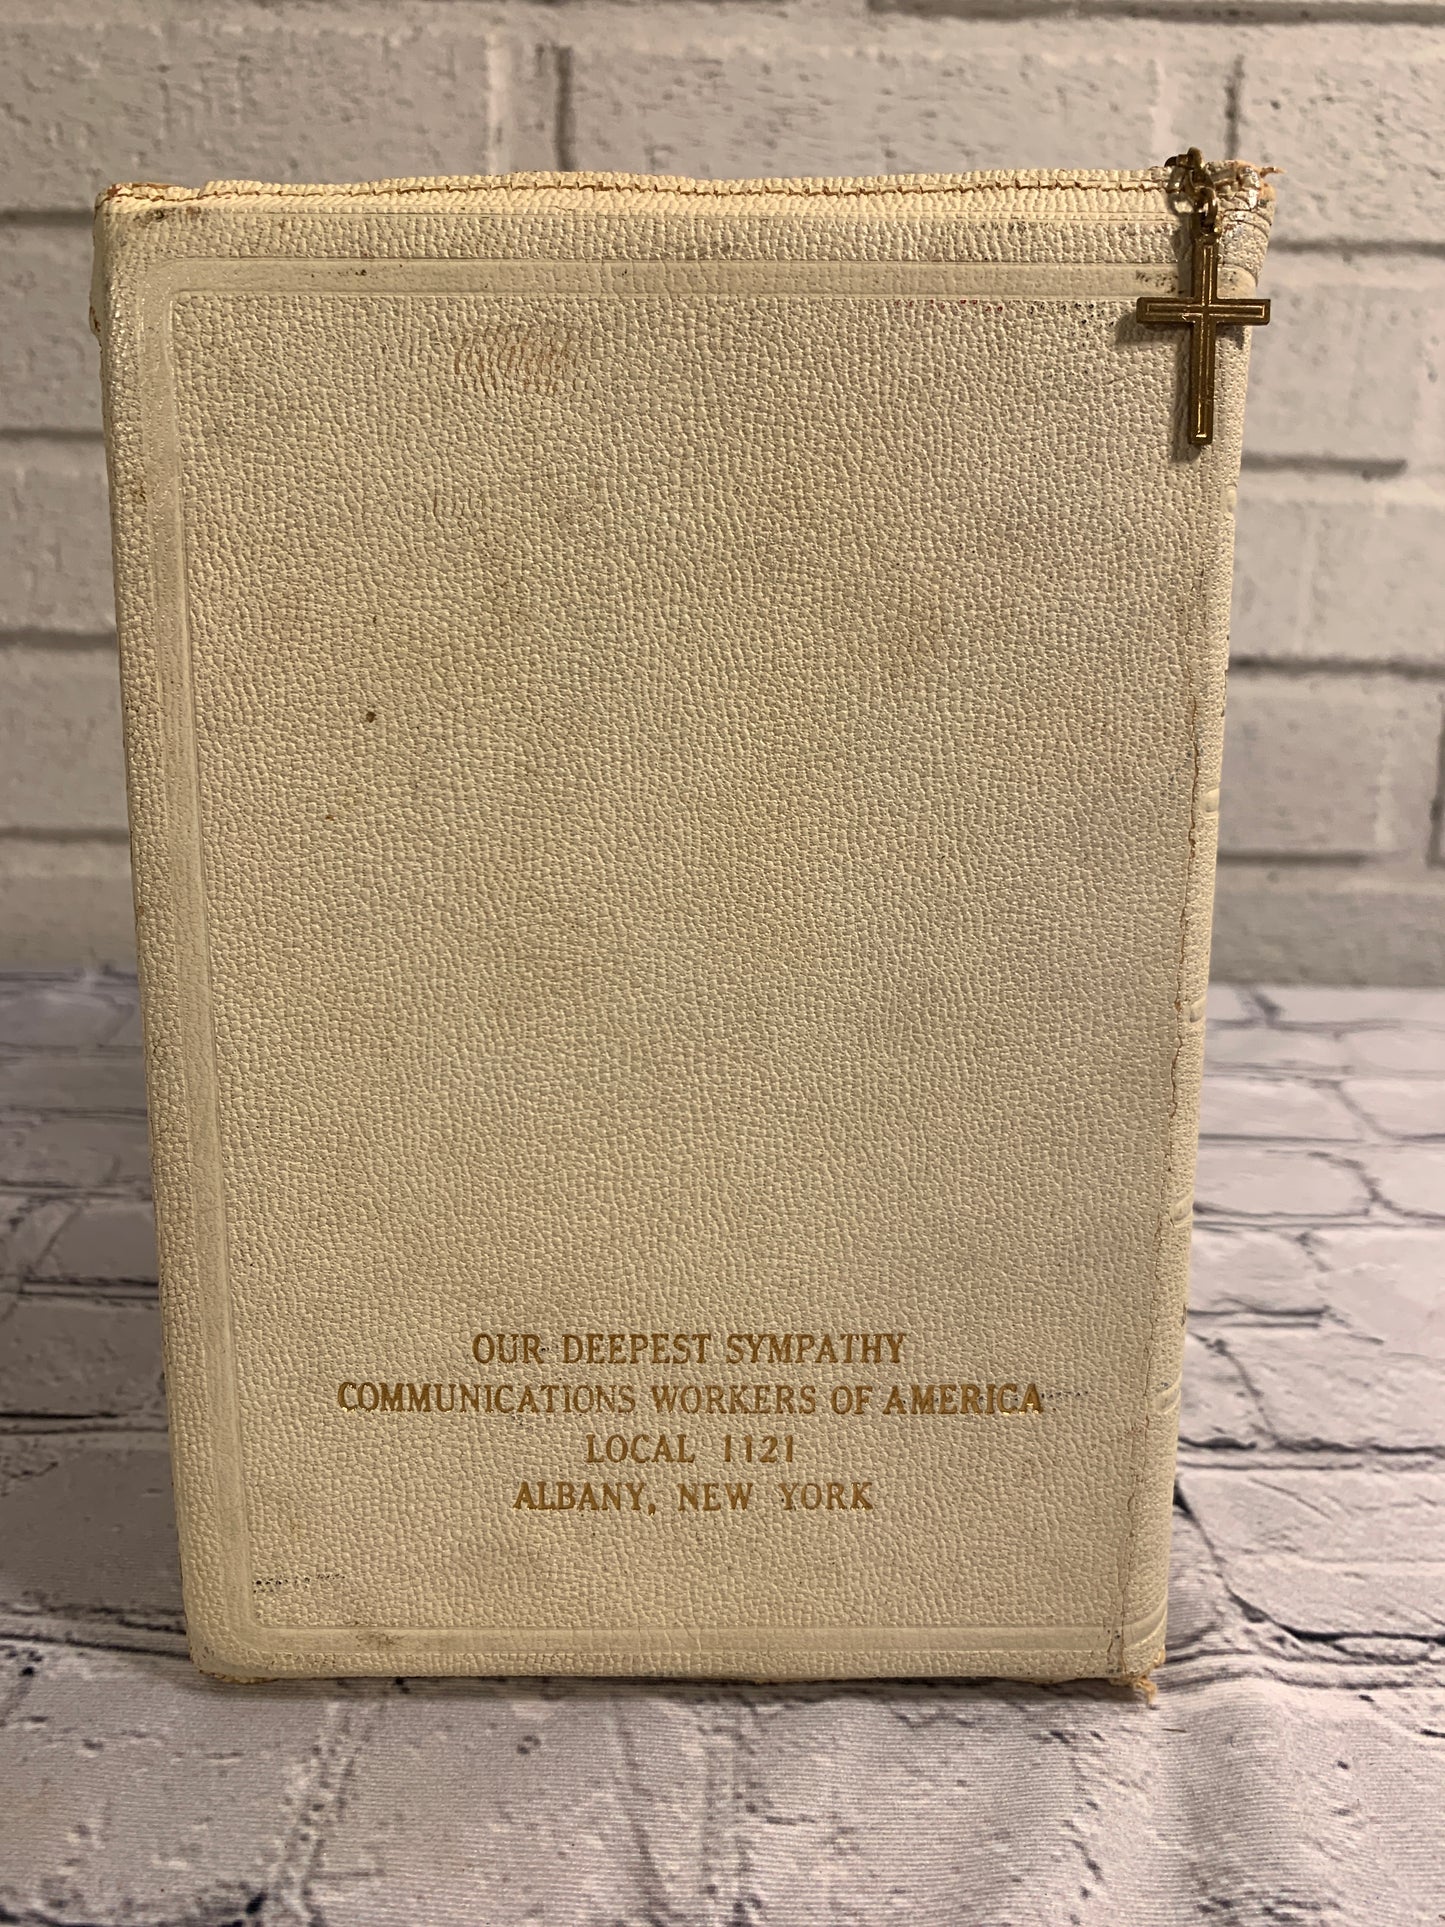 The Holy Bible · New & Old Testaments · KJV [1958 · Memorial Edition · Zippered]